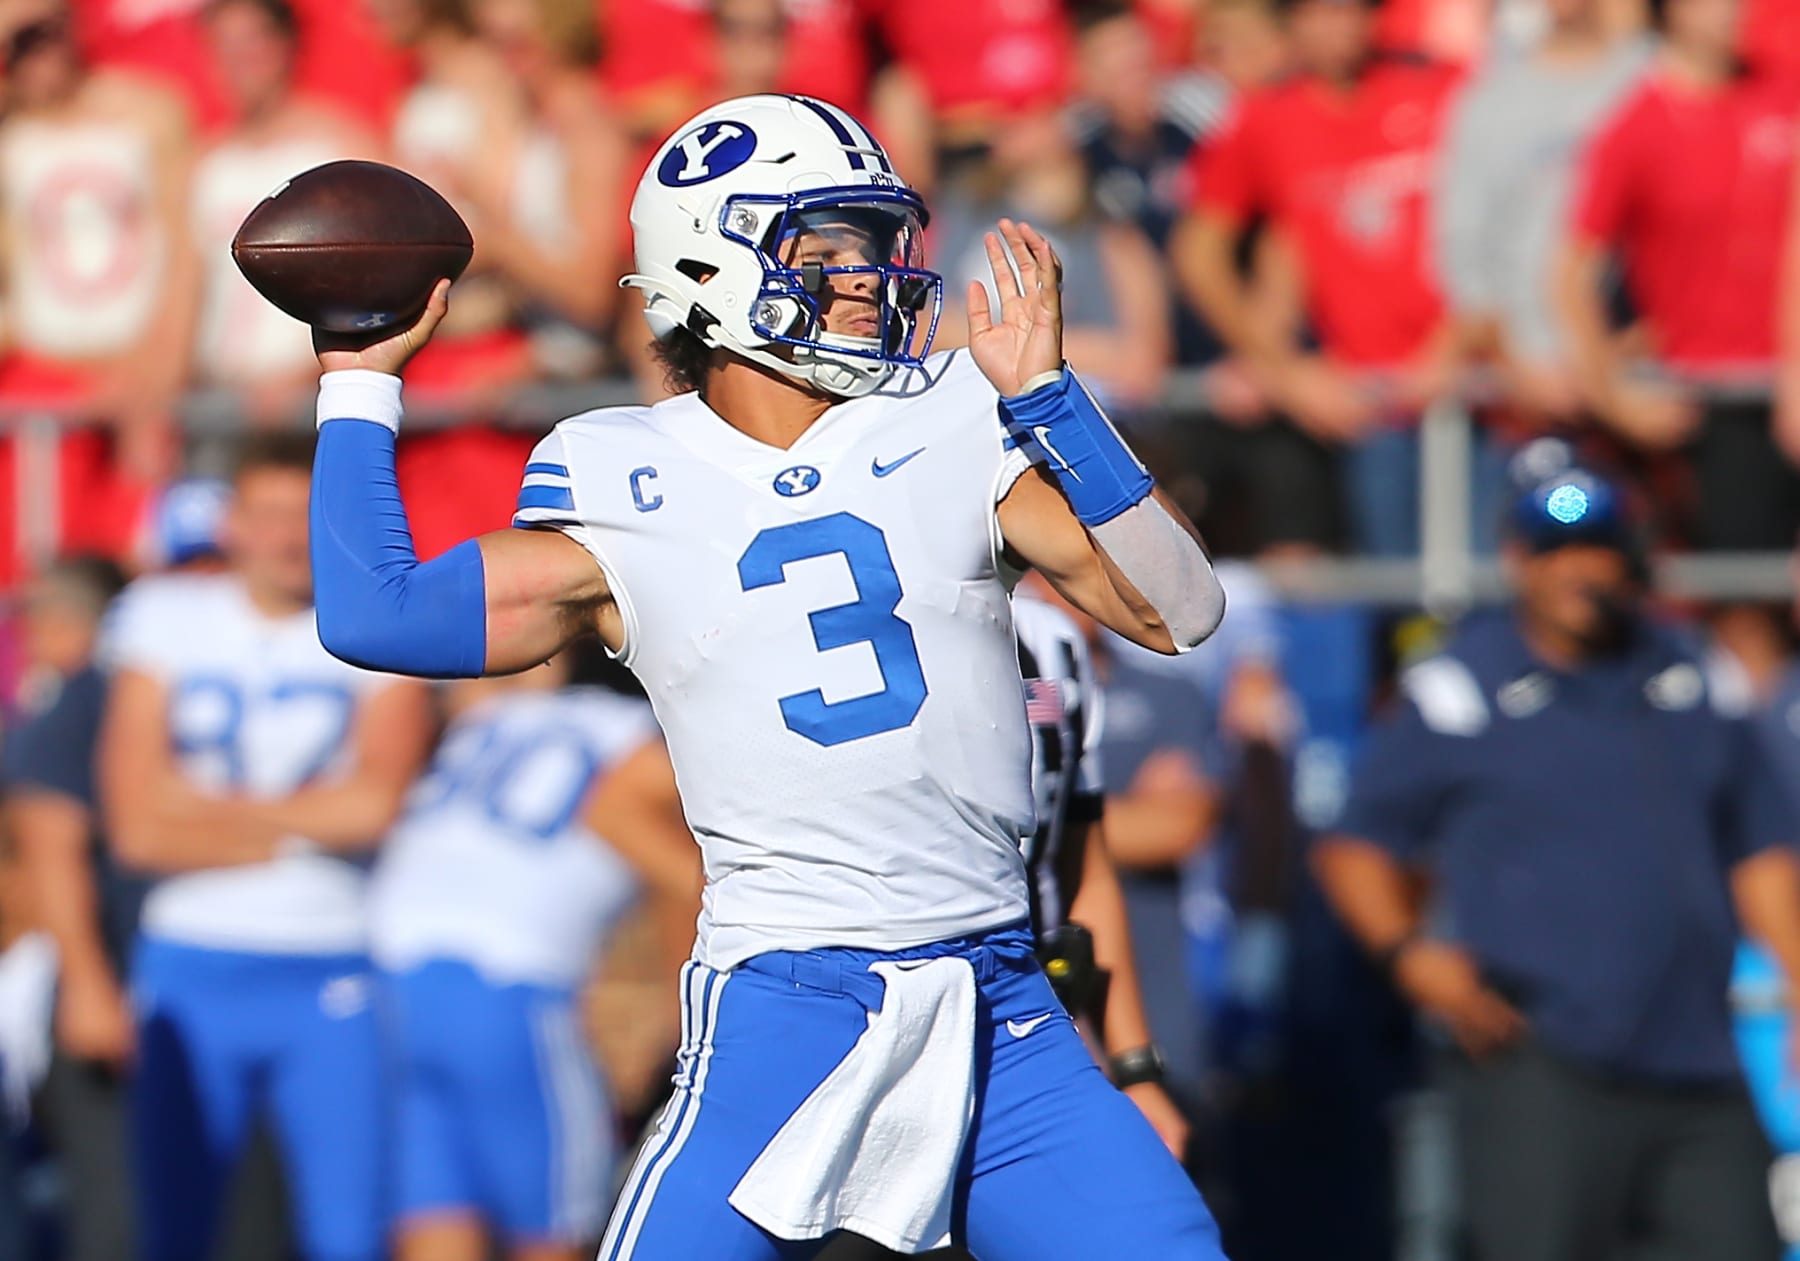 2023 NFL Draft: Ranking The Top 15 Quarterbacks in the Class - Visit NFL  Draft on Sports Illustrated, the latest news coverage, with rankings for NFL  Draft prospects, College Football, Dynasty and Devy Fantasy Football.